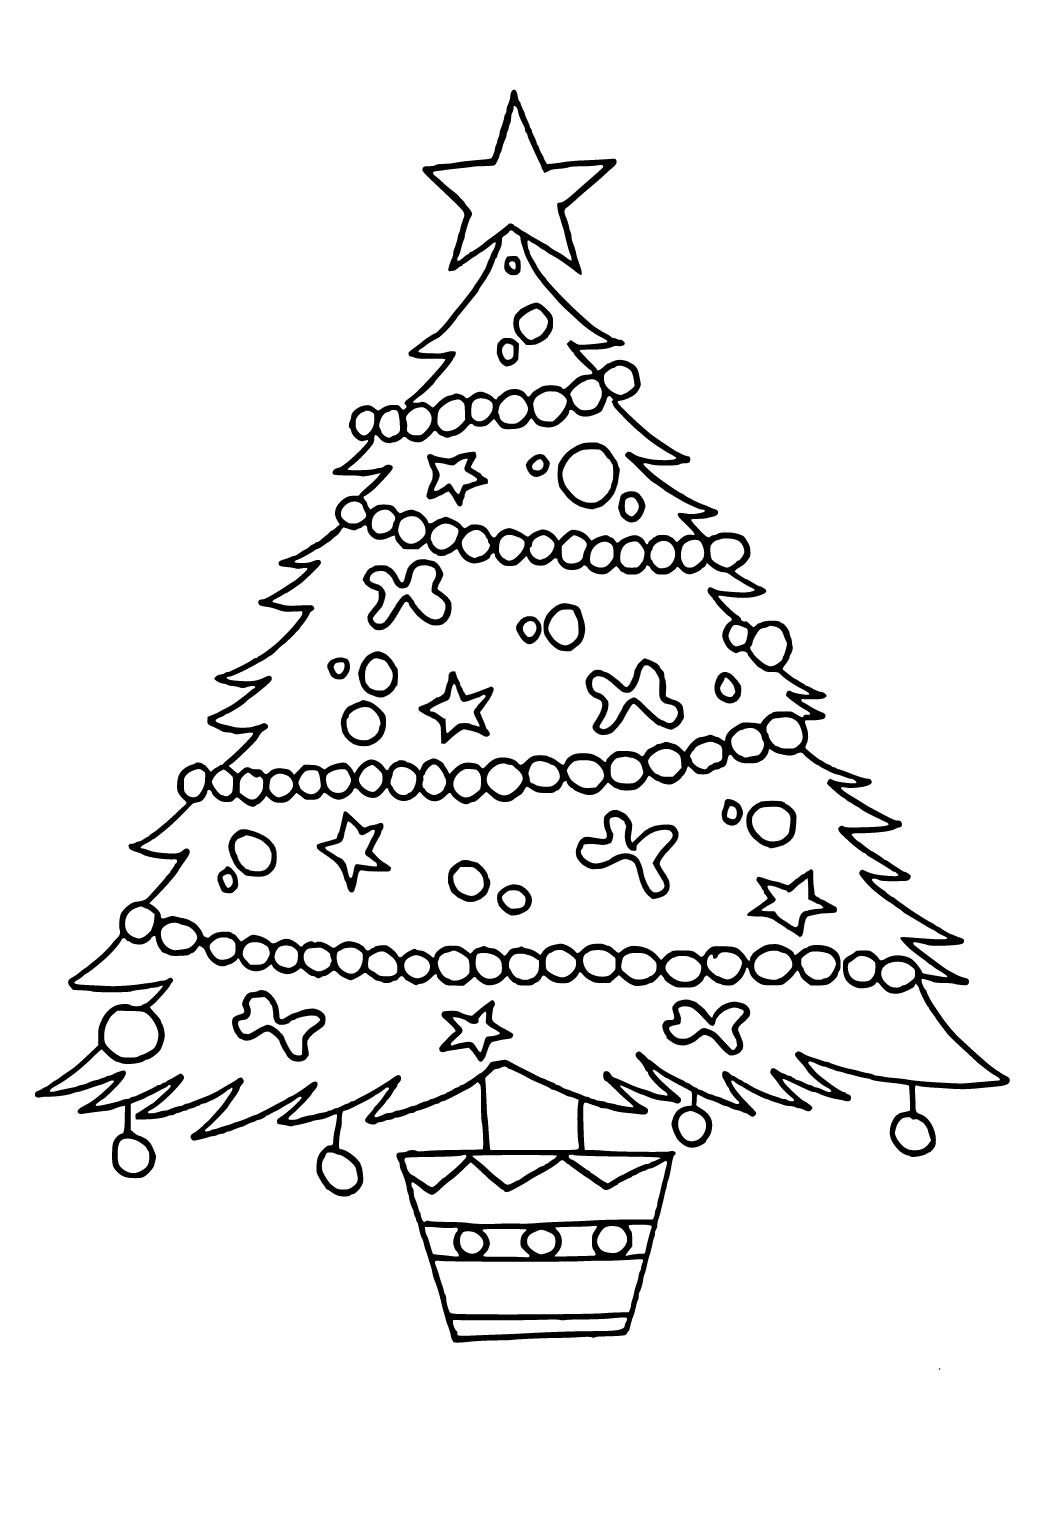 Christmas Coloring Page. Winter Holiday Coloring Card. Vector Illustration.  Royalty Free SVG, Cliparts, Vectors, and Stock Illustration. Image  178462358.